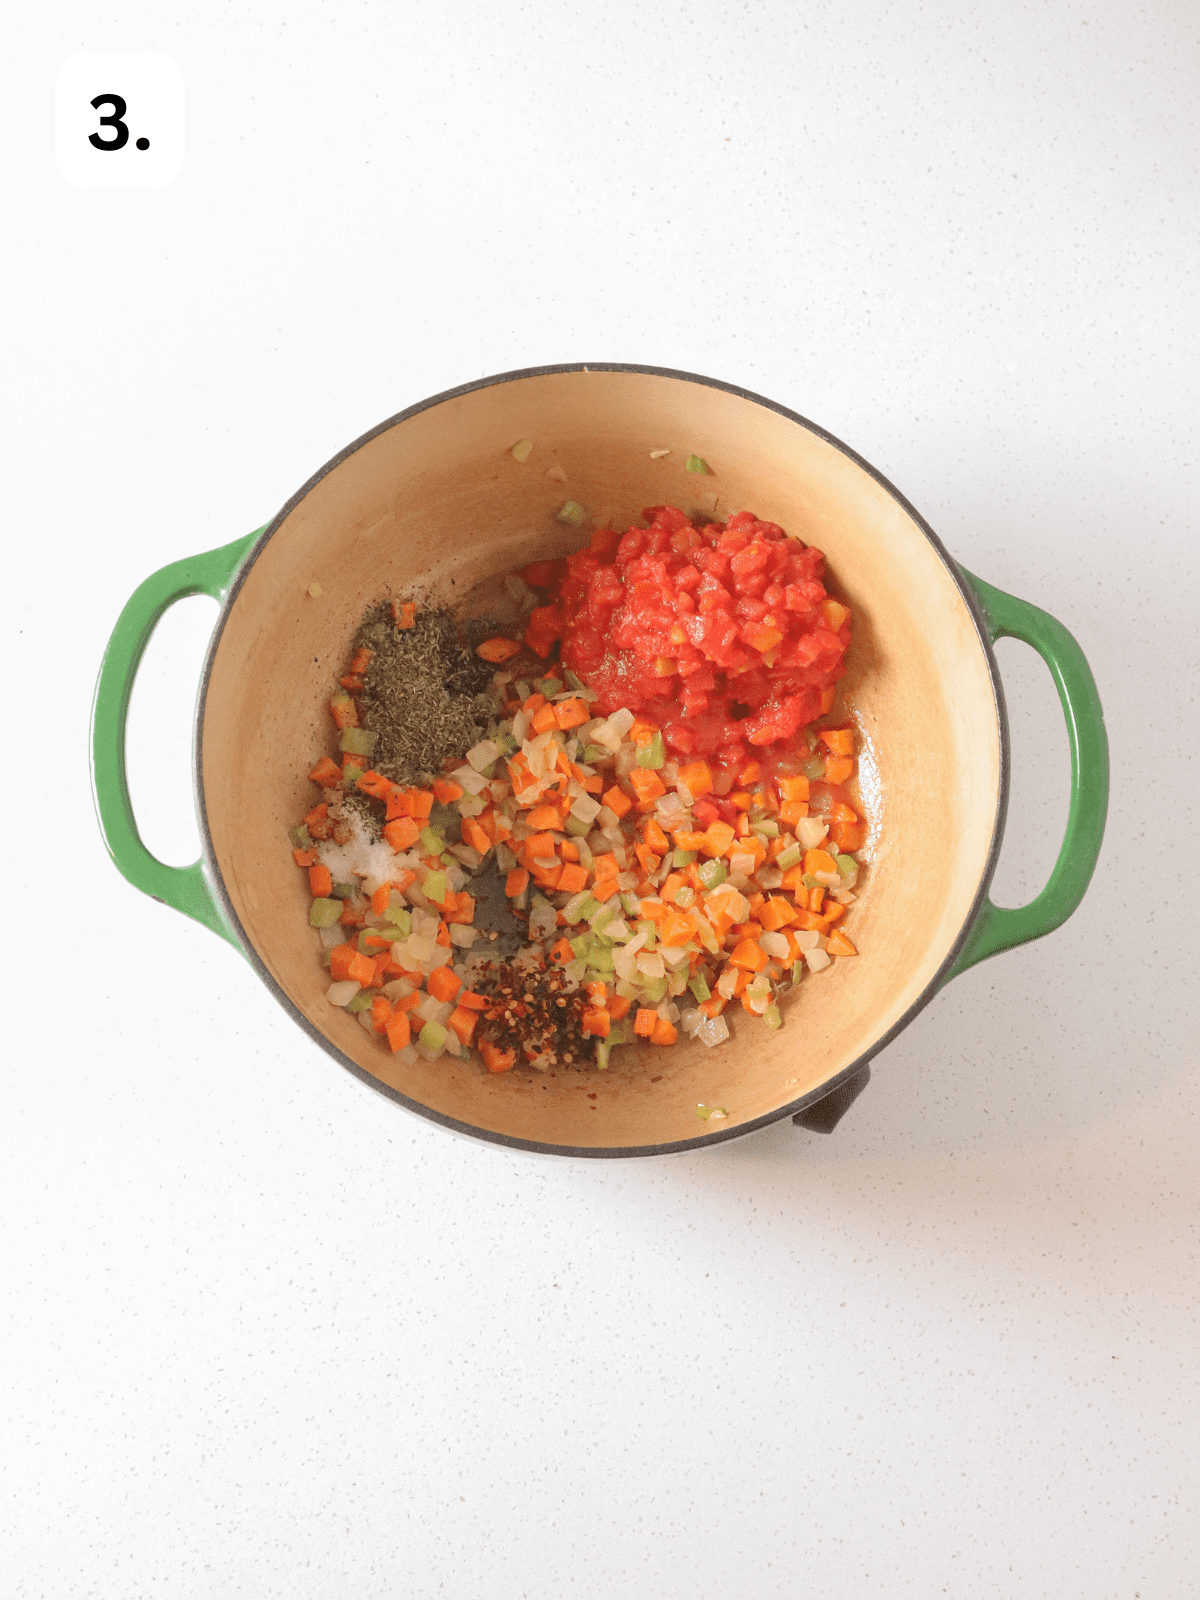 Green dutch oven with tomatoes, mirepoix and seasonings